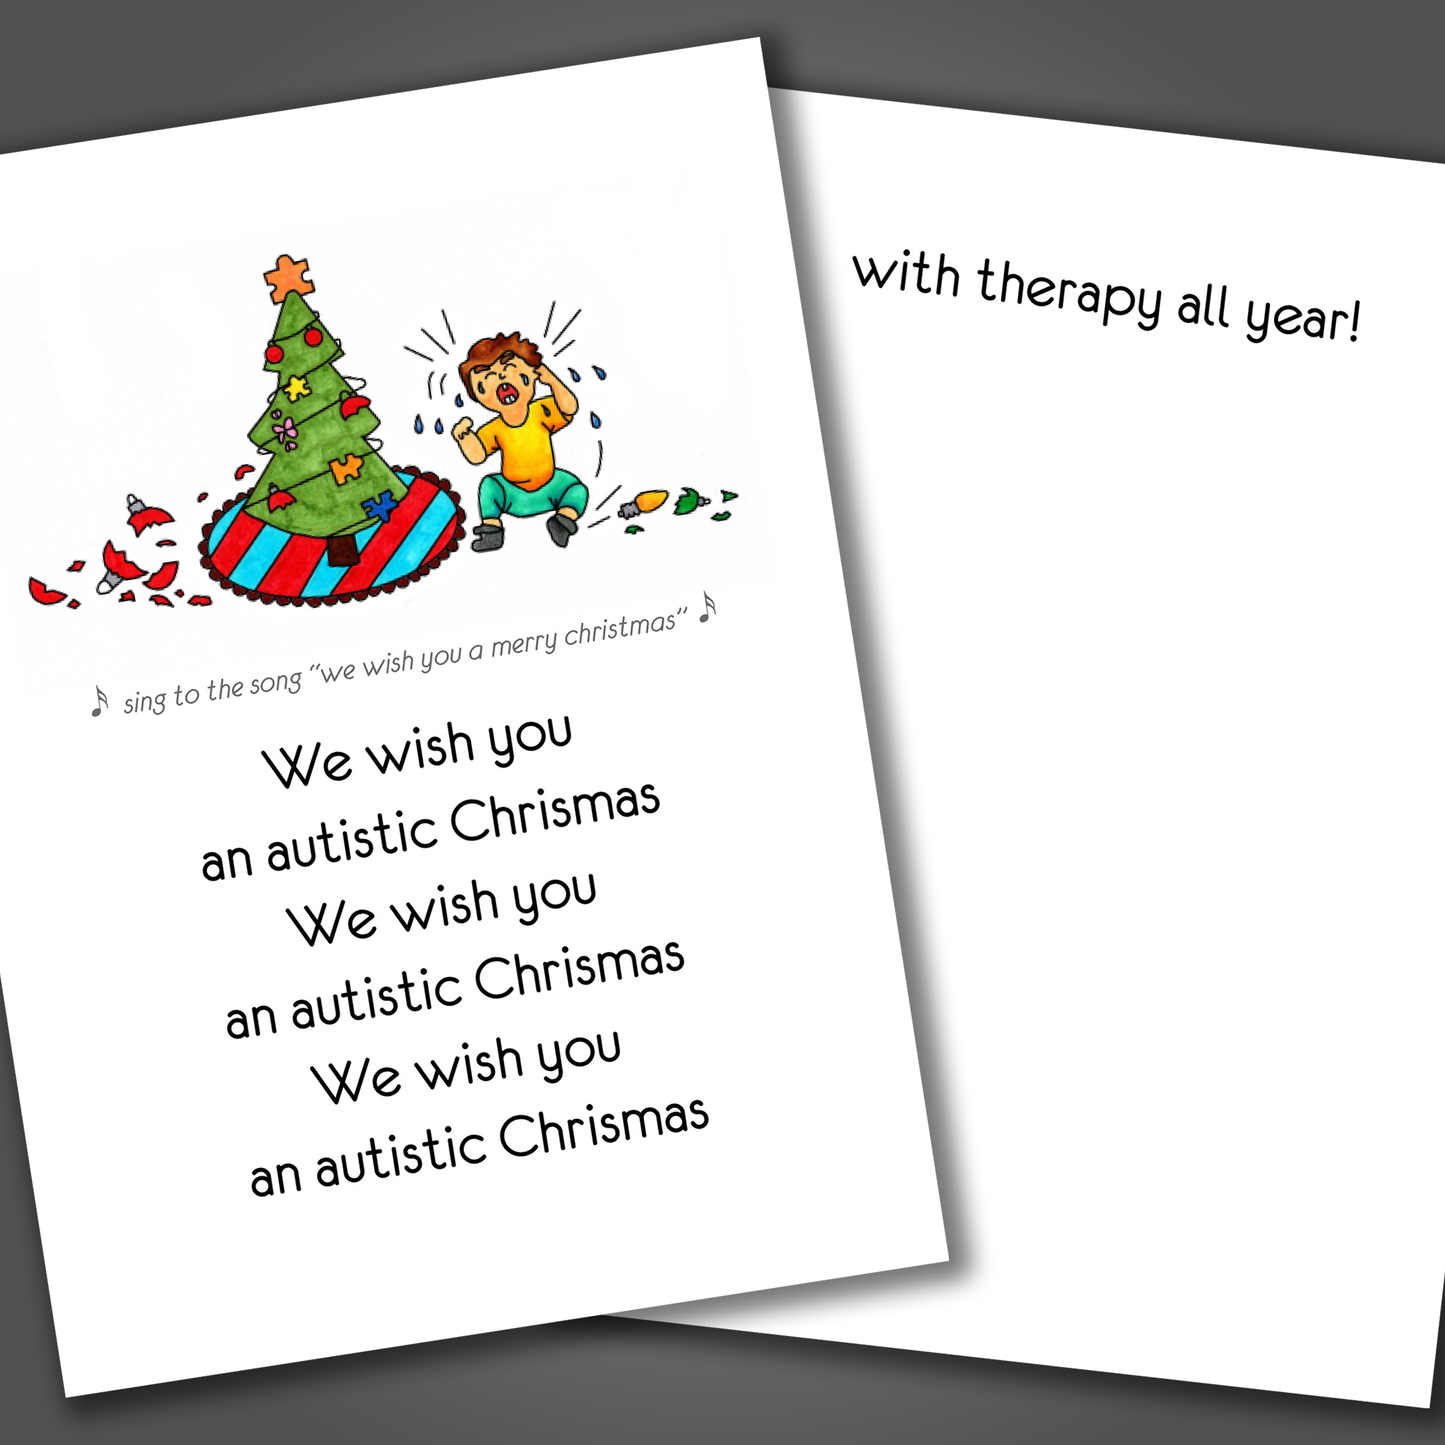 Funny special needs Christmas card with a child crying in front of a Christmas tree on the front. Inside the card is a joke that says enjoy therapy all year!